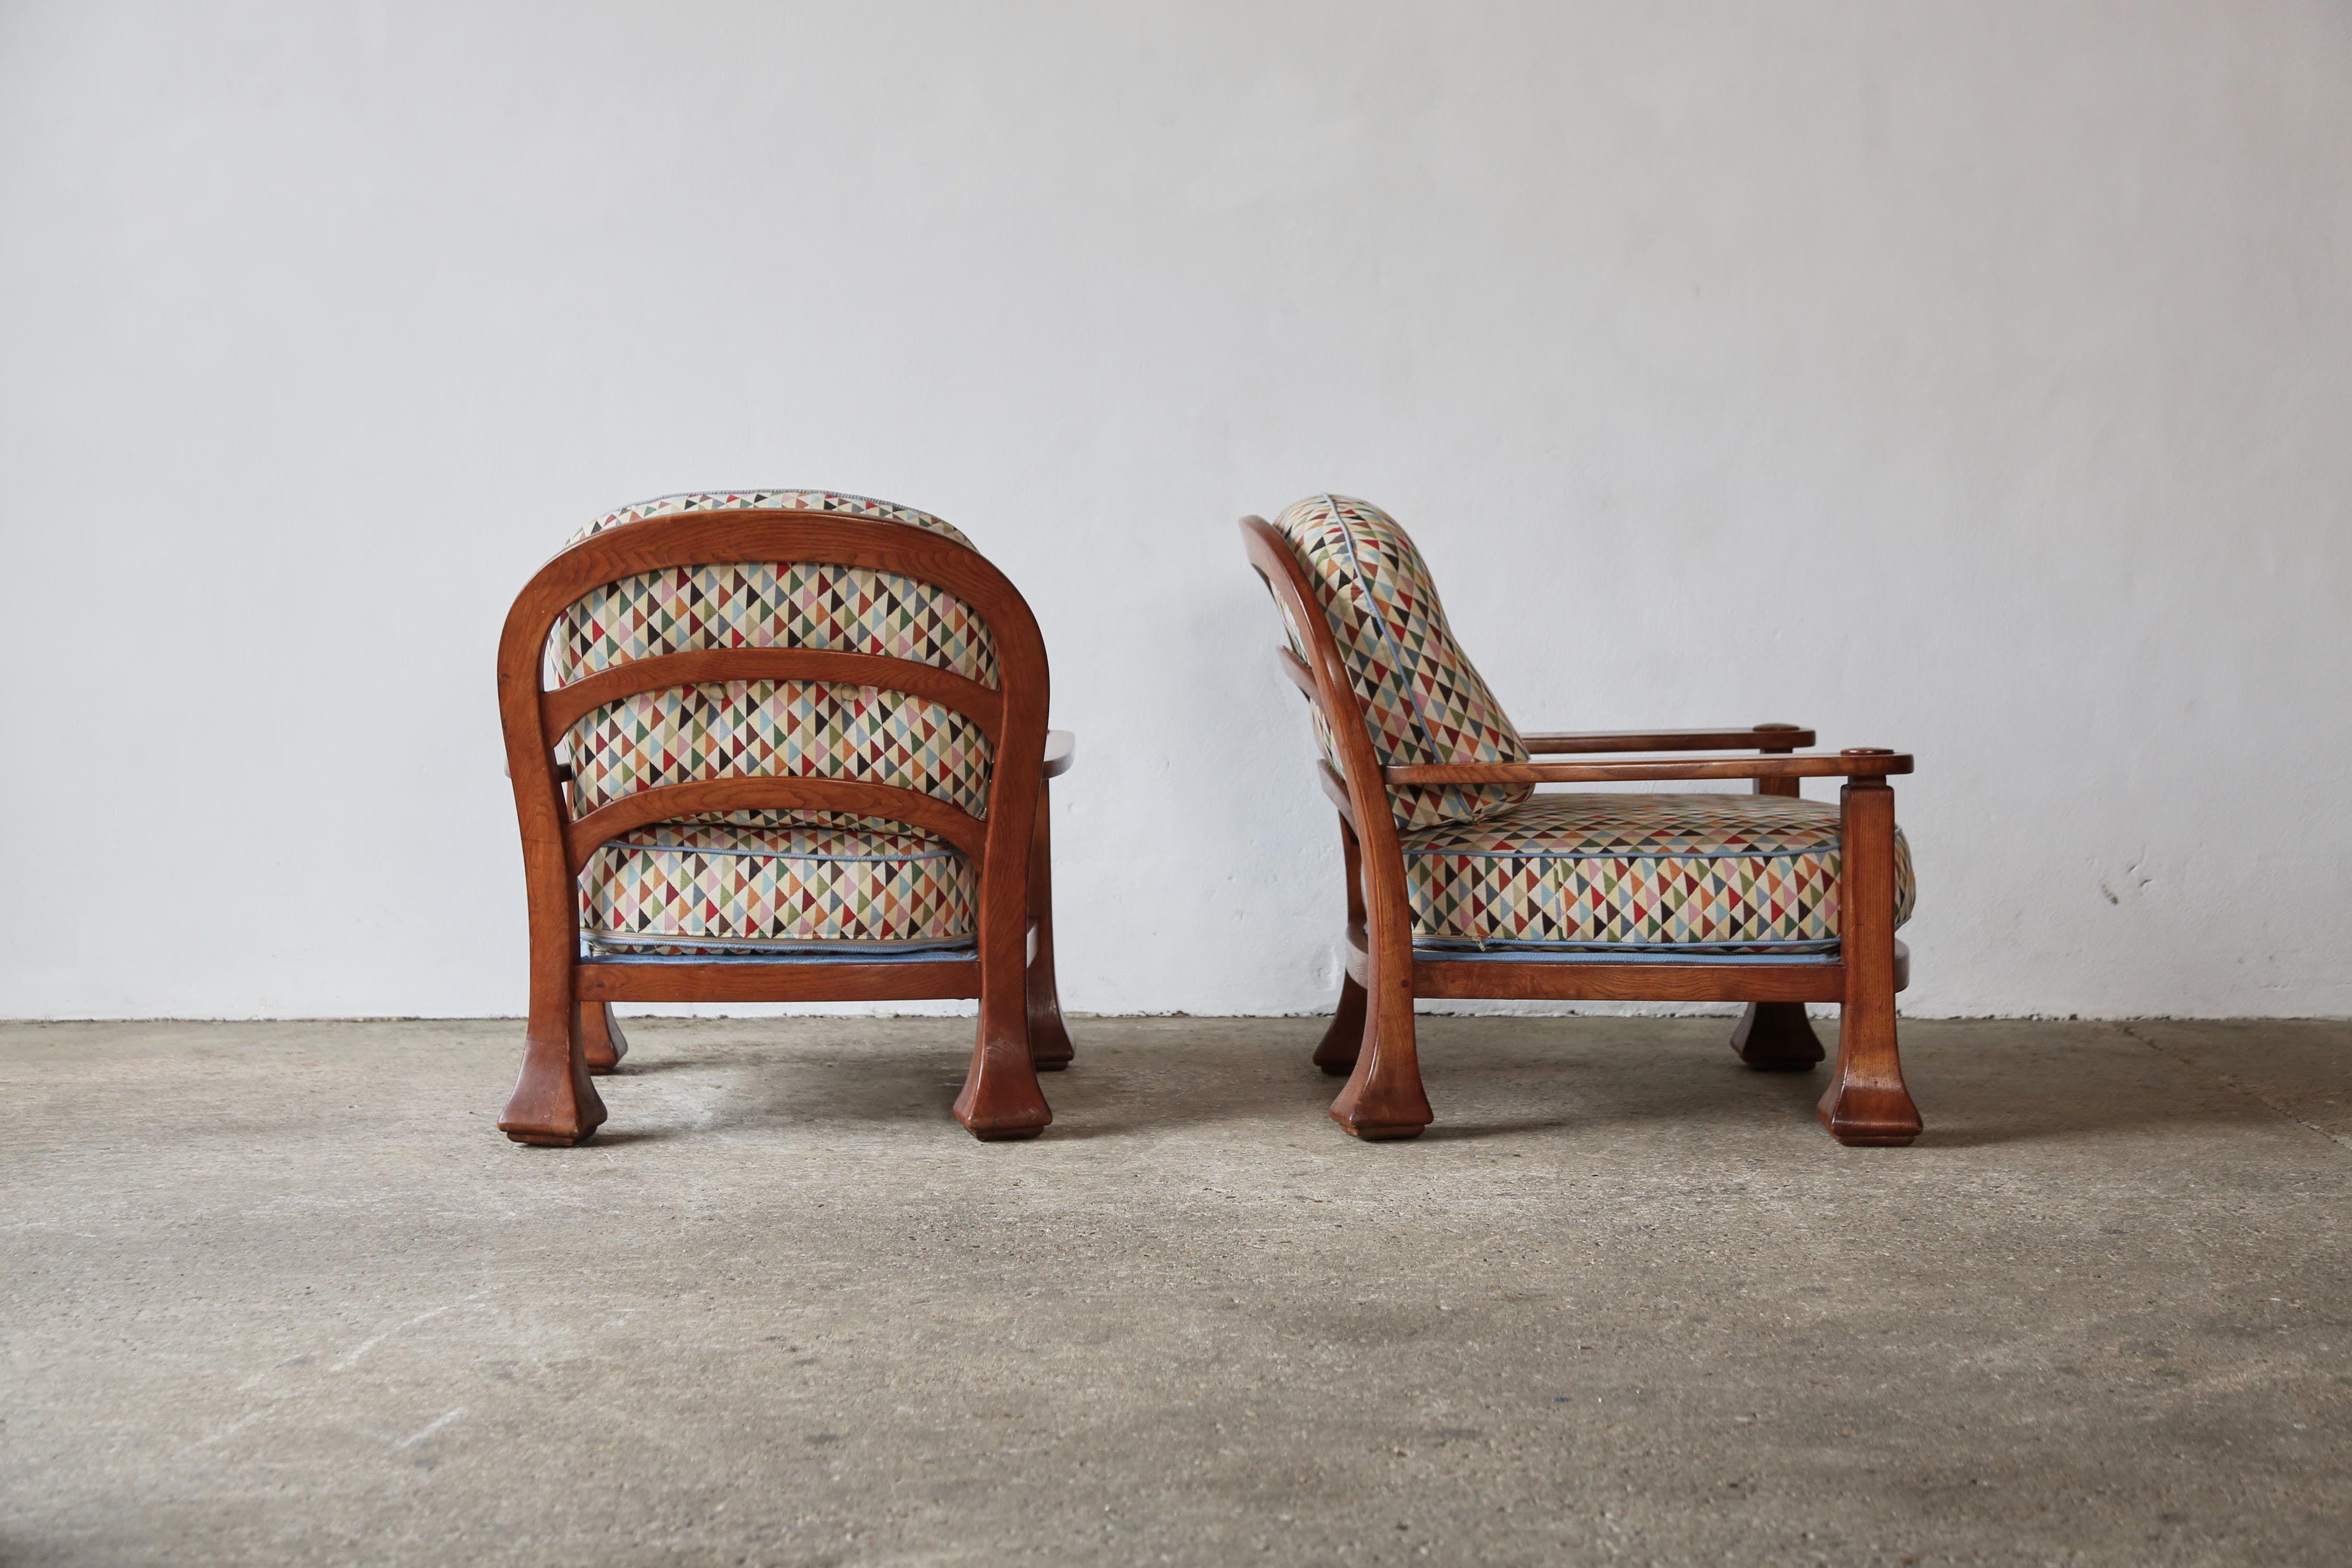 A rare and unusual pair of Italian 1970s armchairs. The loose cushions are recently recovered in a colourful geomatric pattern, but are easy to recover if a different fabric is preferred. The wooden frames have a good even tone and patina and are in